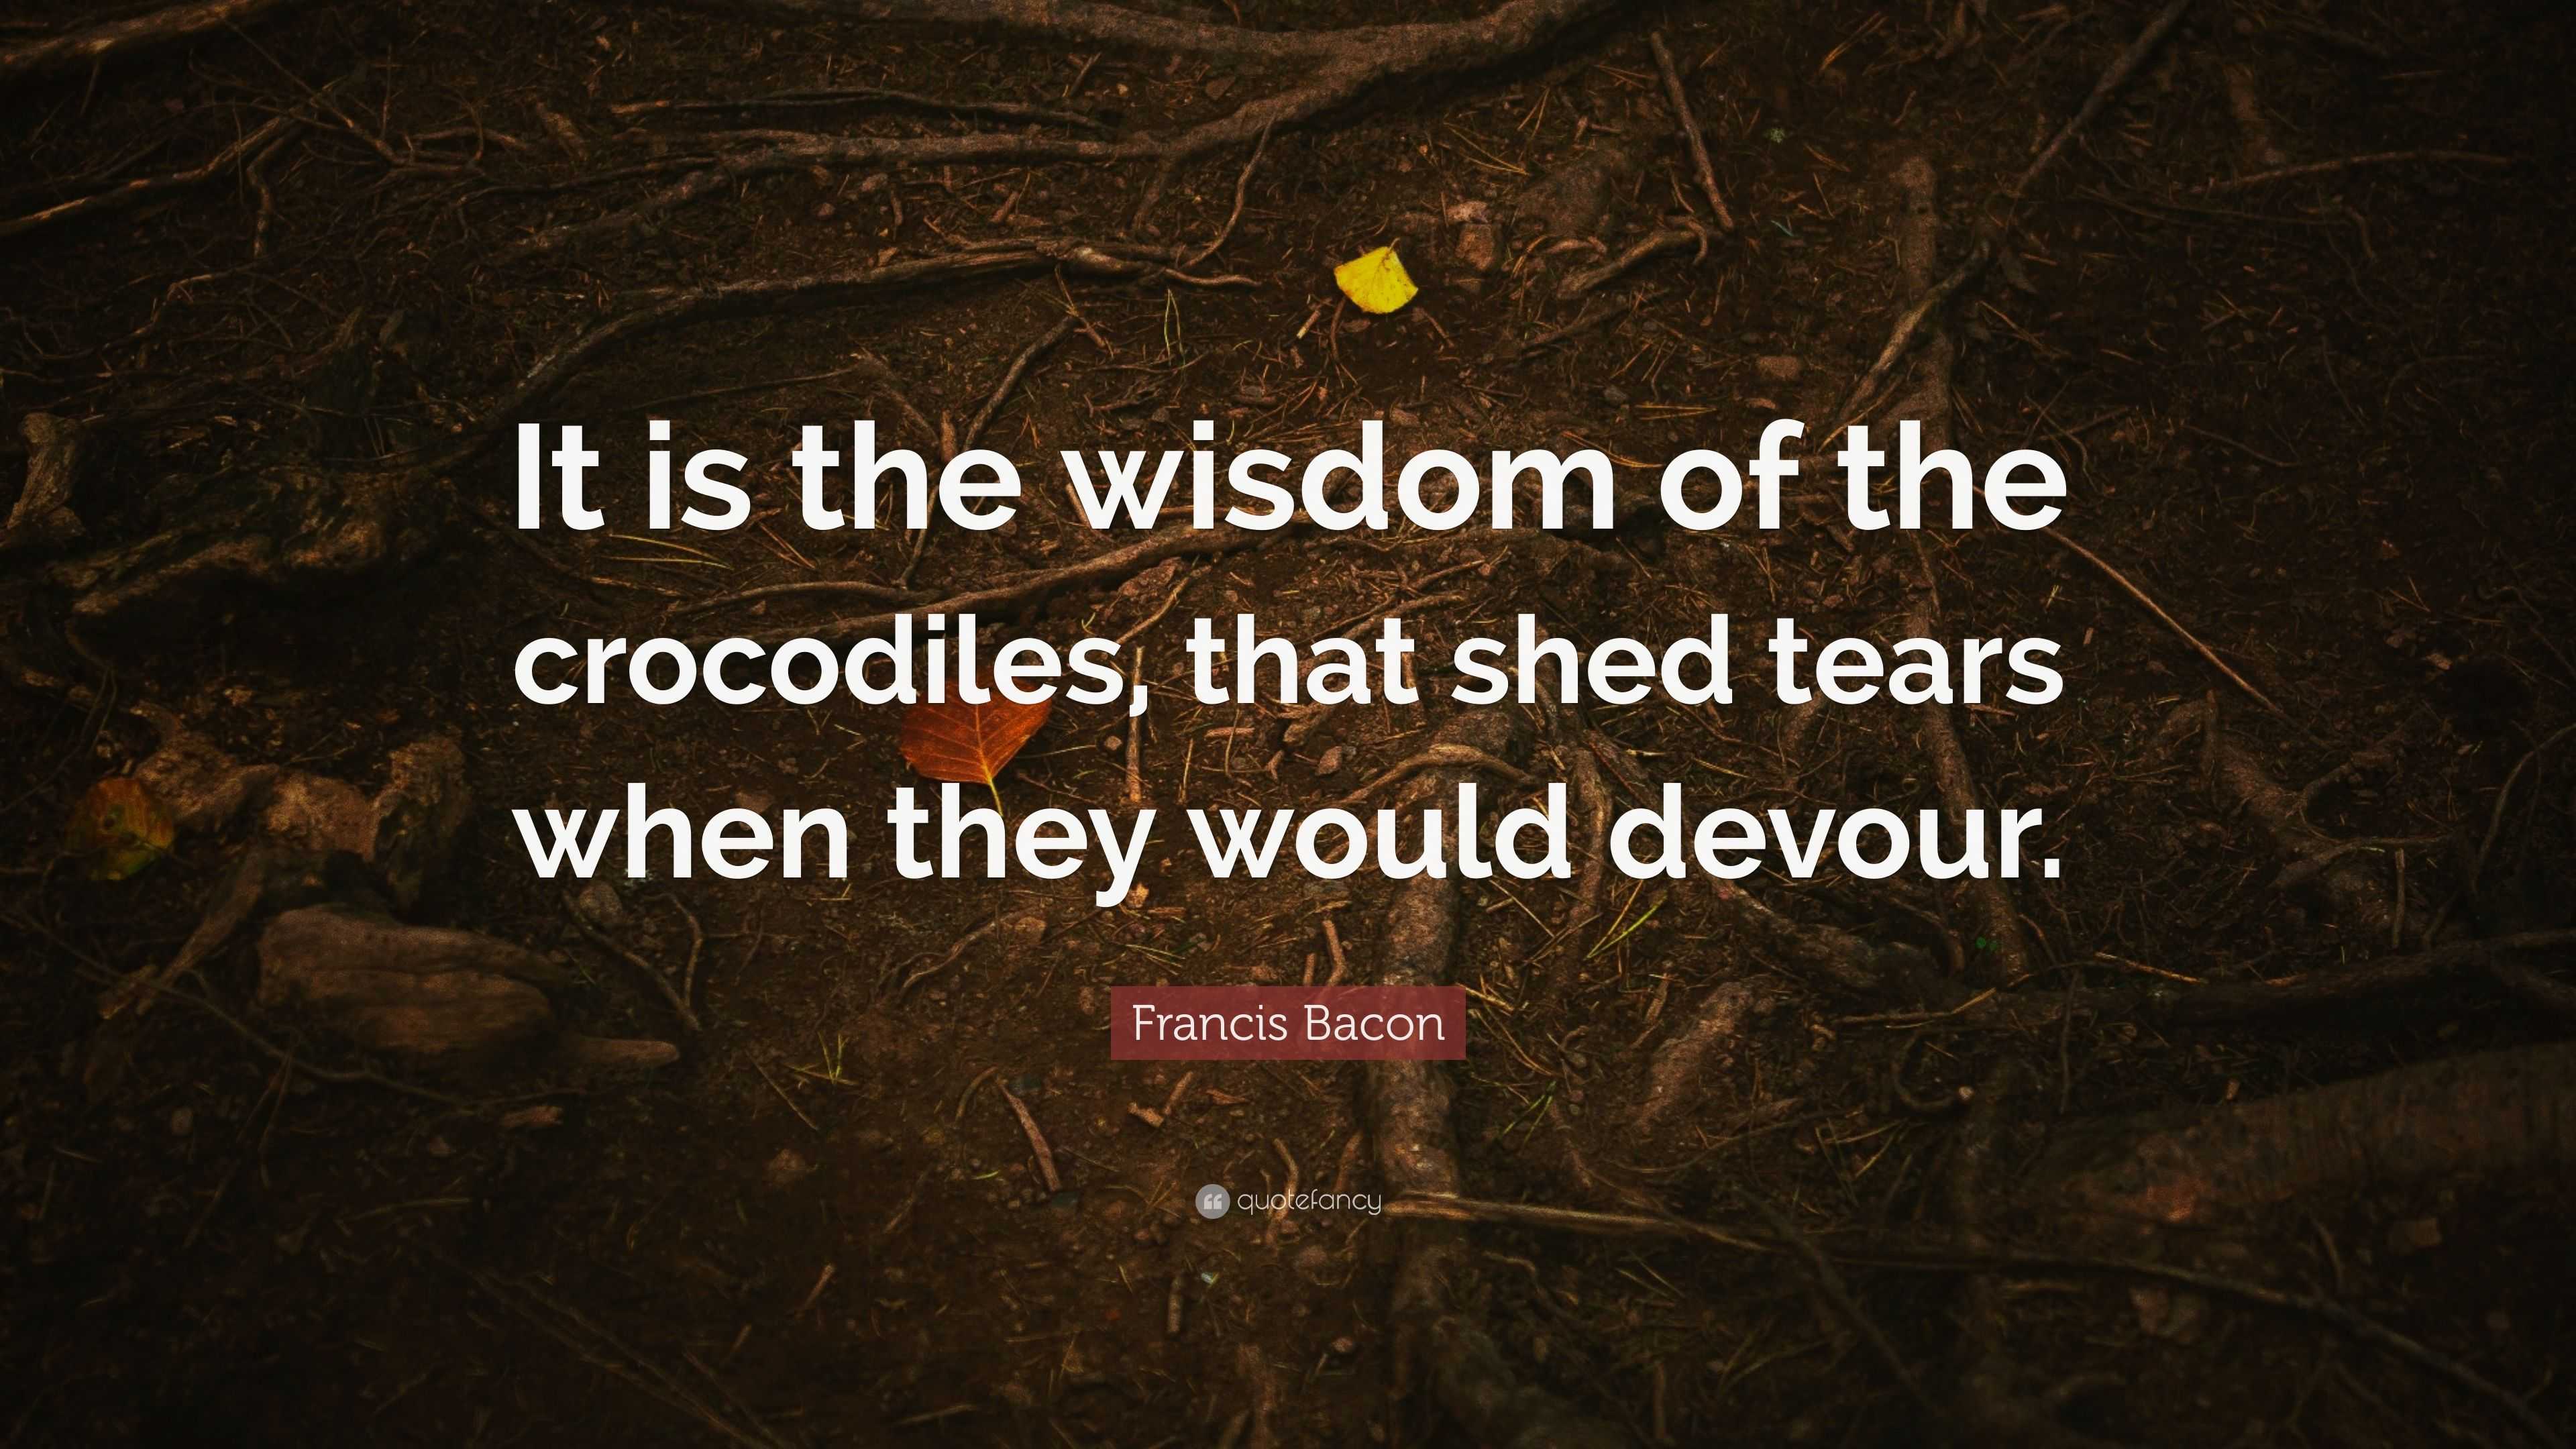 Francis Bacon Quote: “It is the wisdom of the crocodiles, that ...